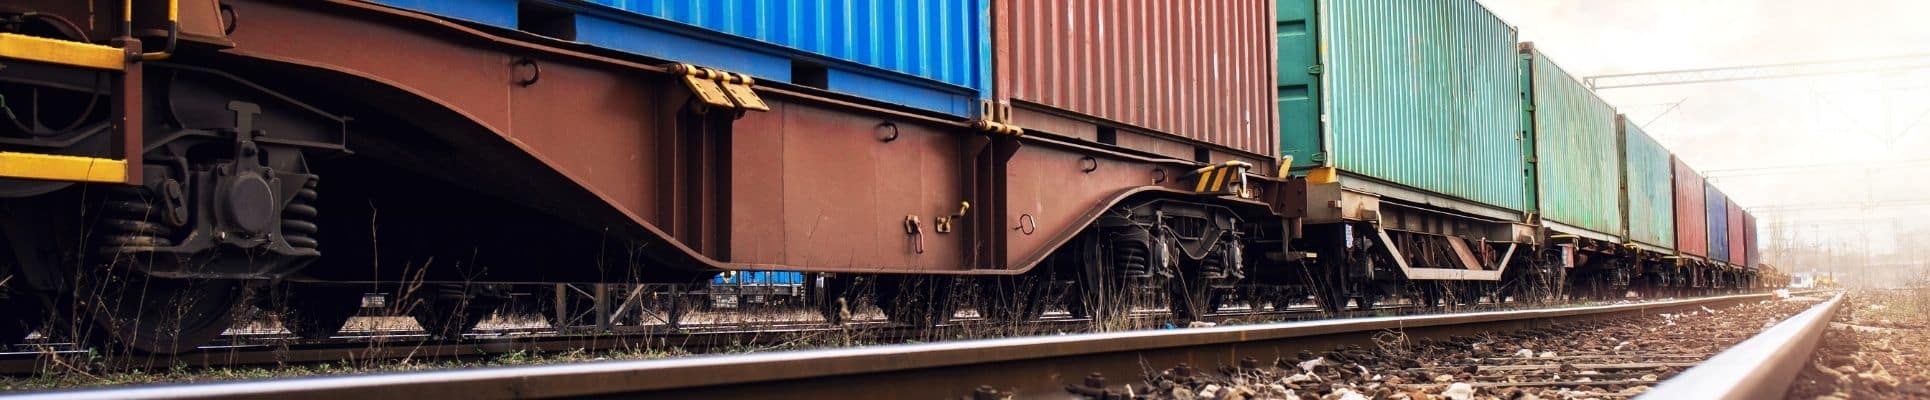 The Pros and Cons of Shipping by Rail vs. Road